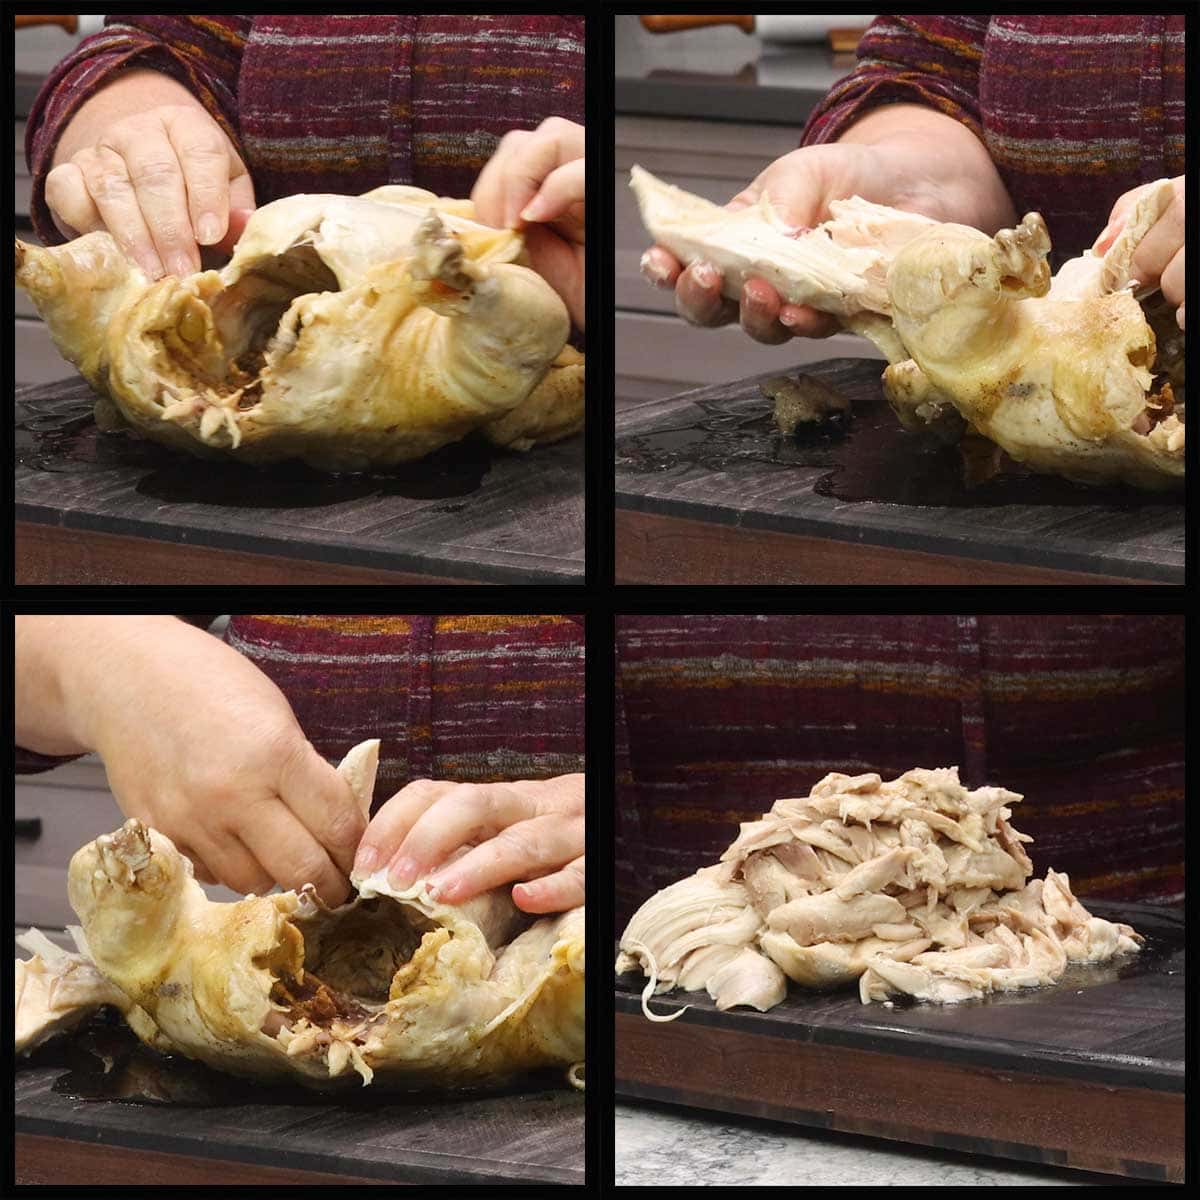 removing the chicken meat from the bones.